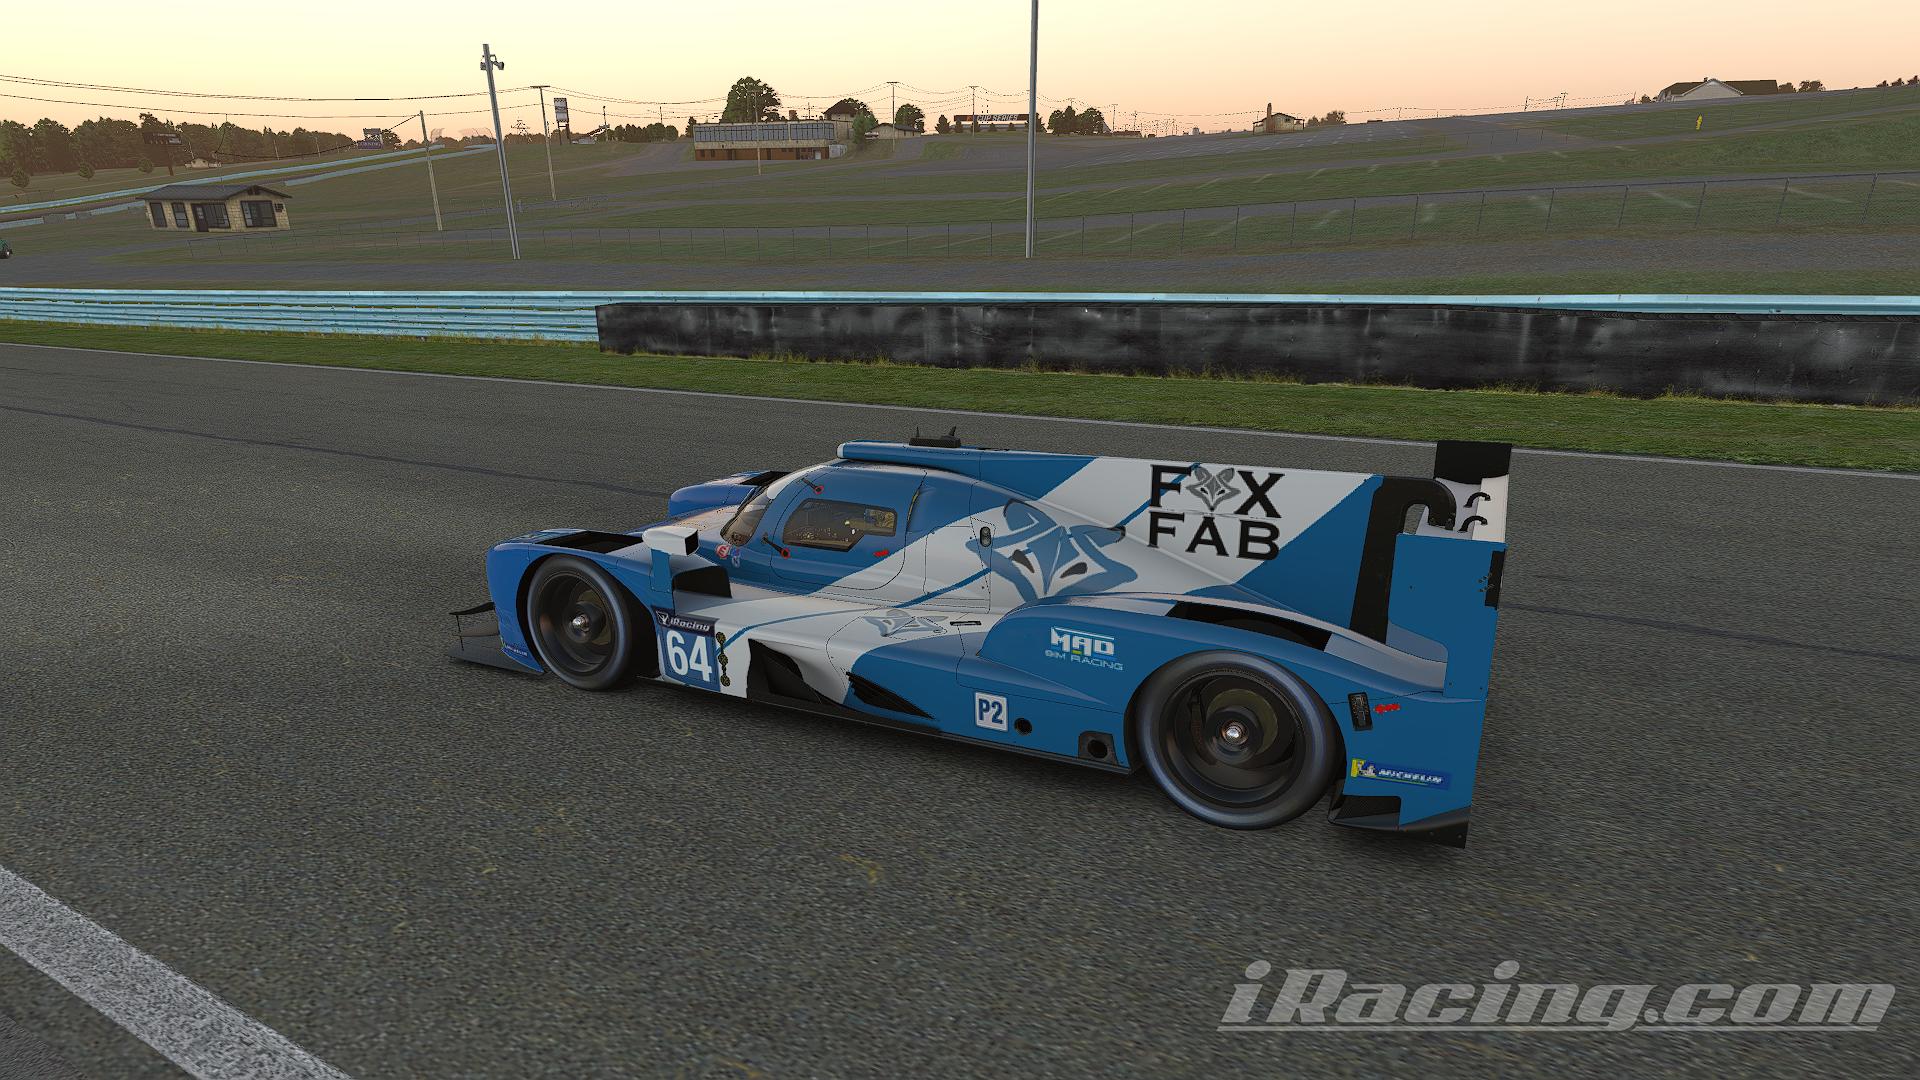 Preview of Fox Fab MSR LMP2 by Tyler Beamon